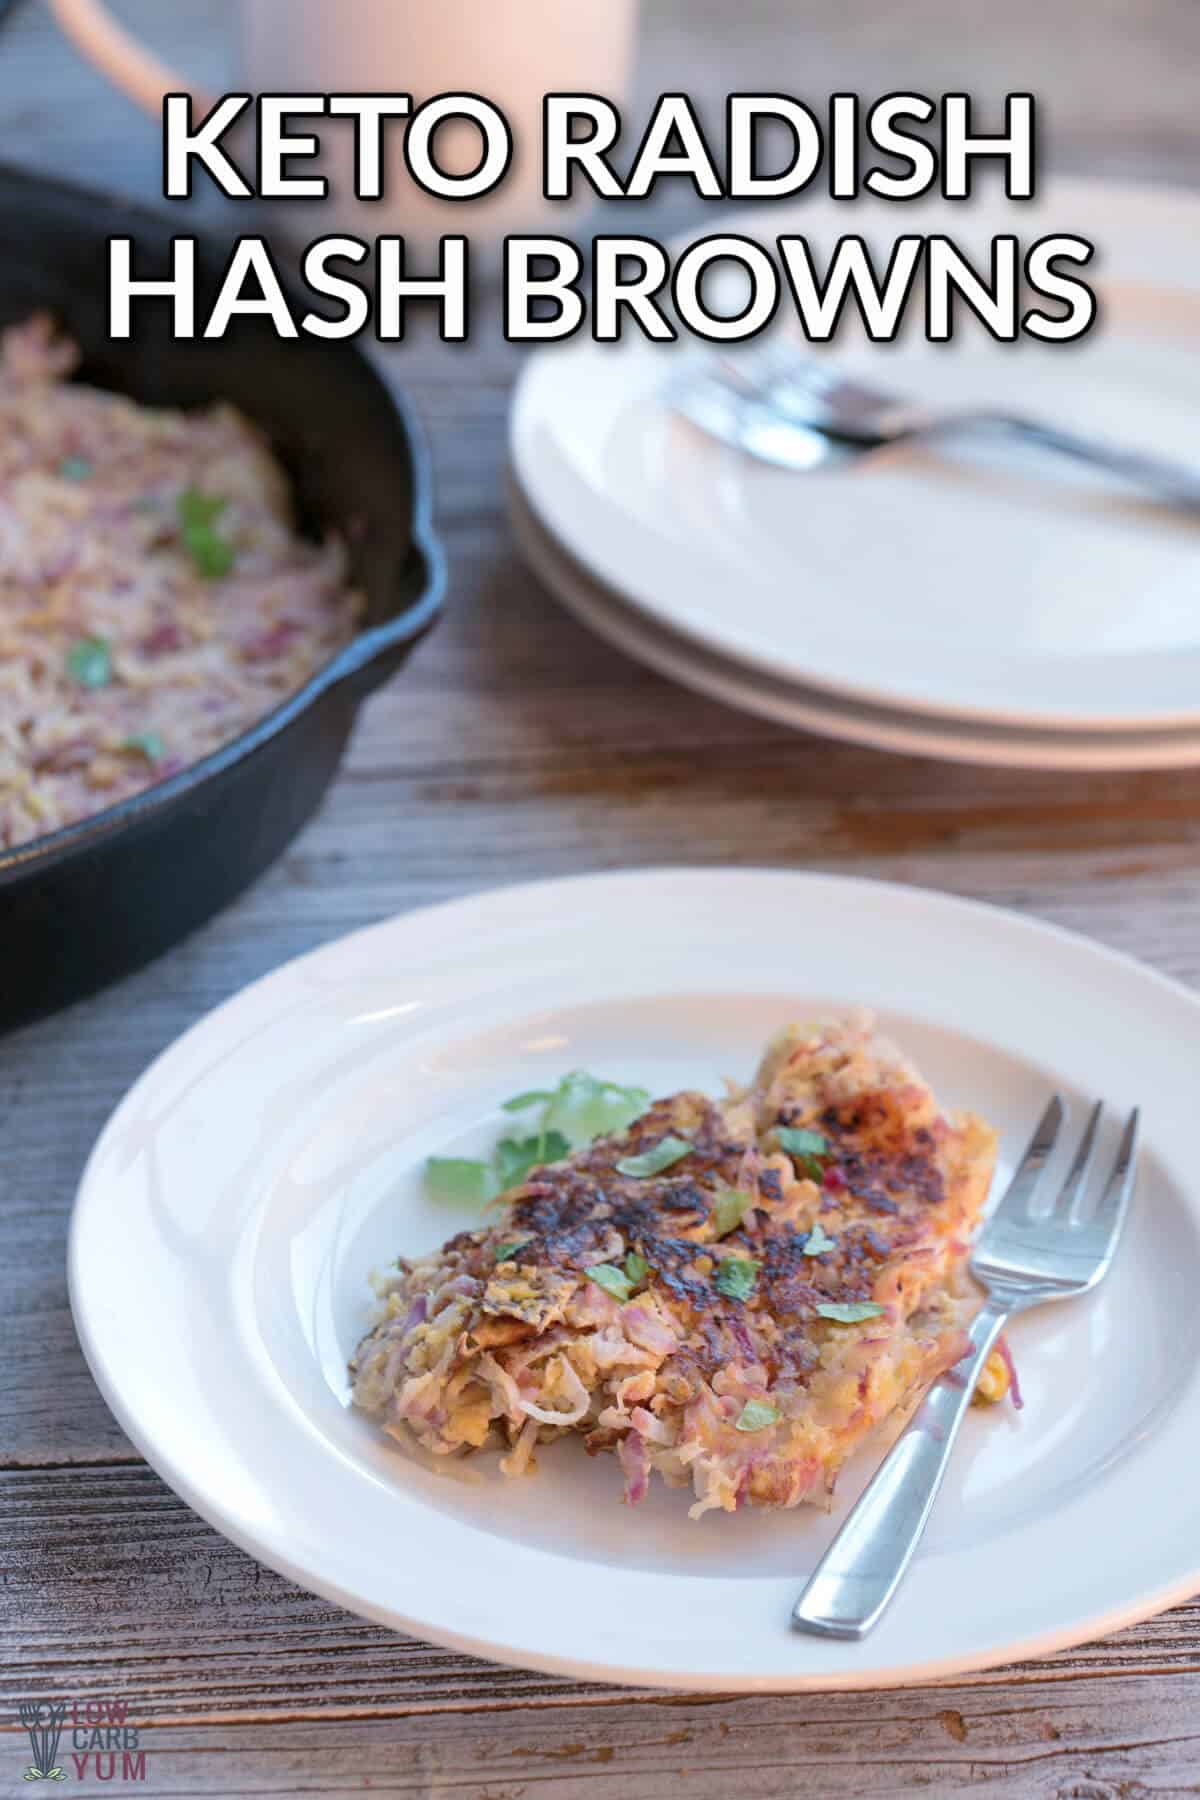 keto hash browns image with text overlay.